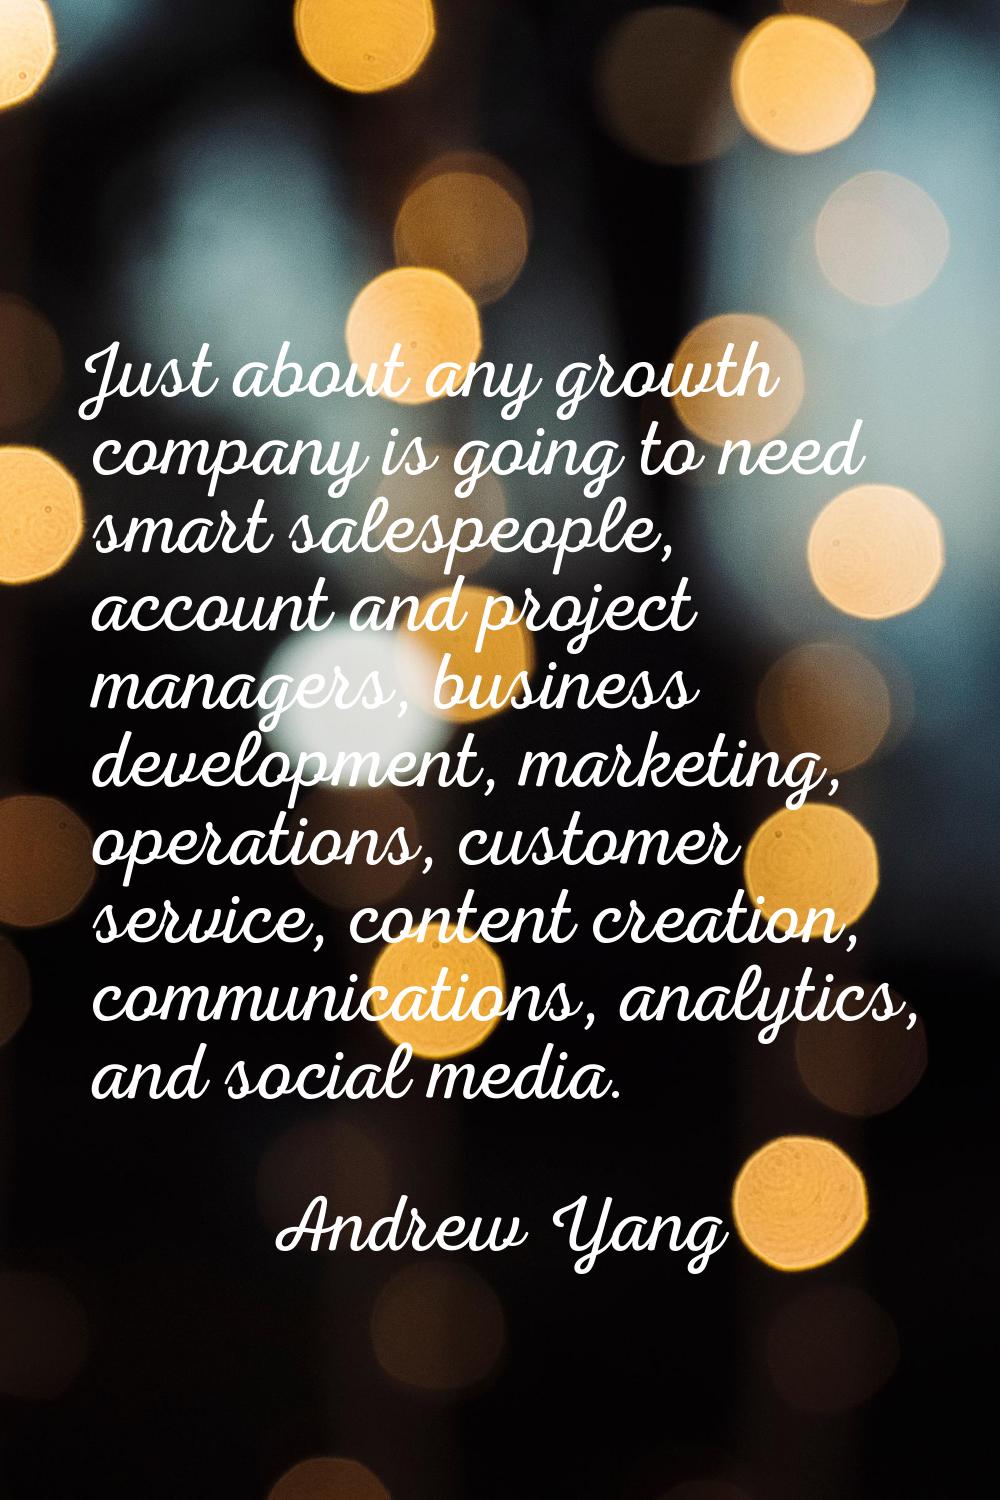 Just about any growth company is going to need smart salespeople, account and project managers, bus